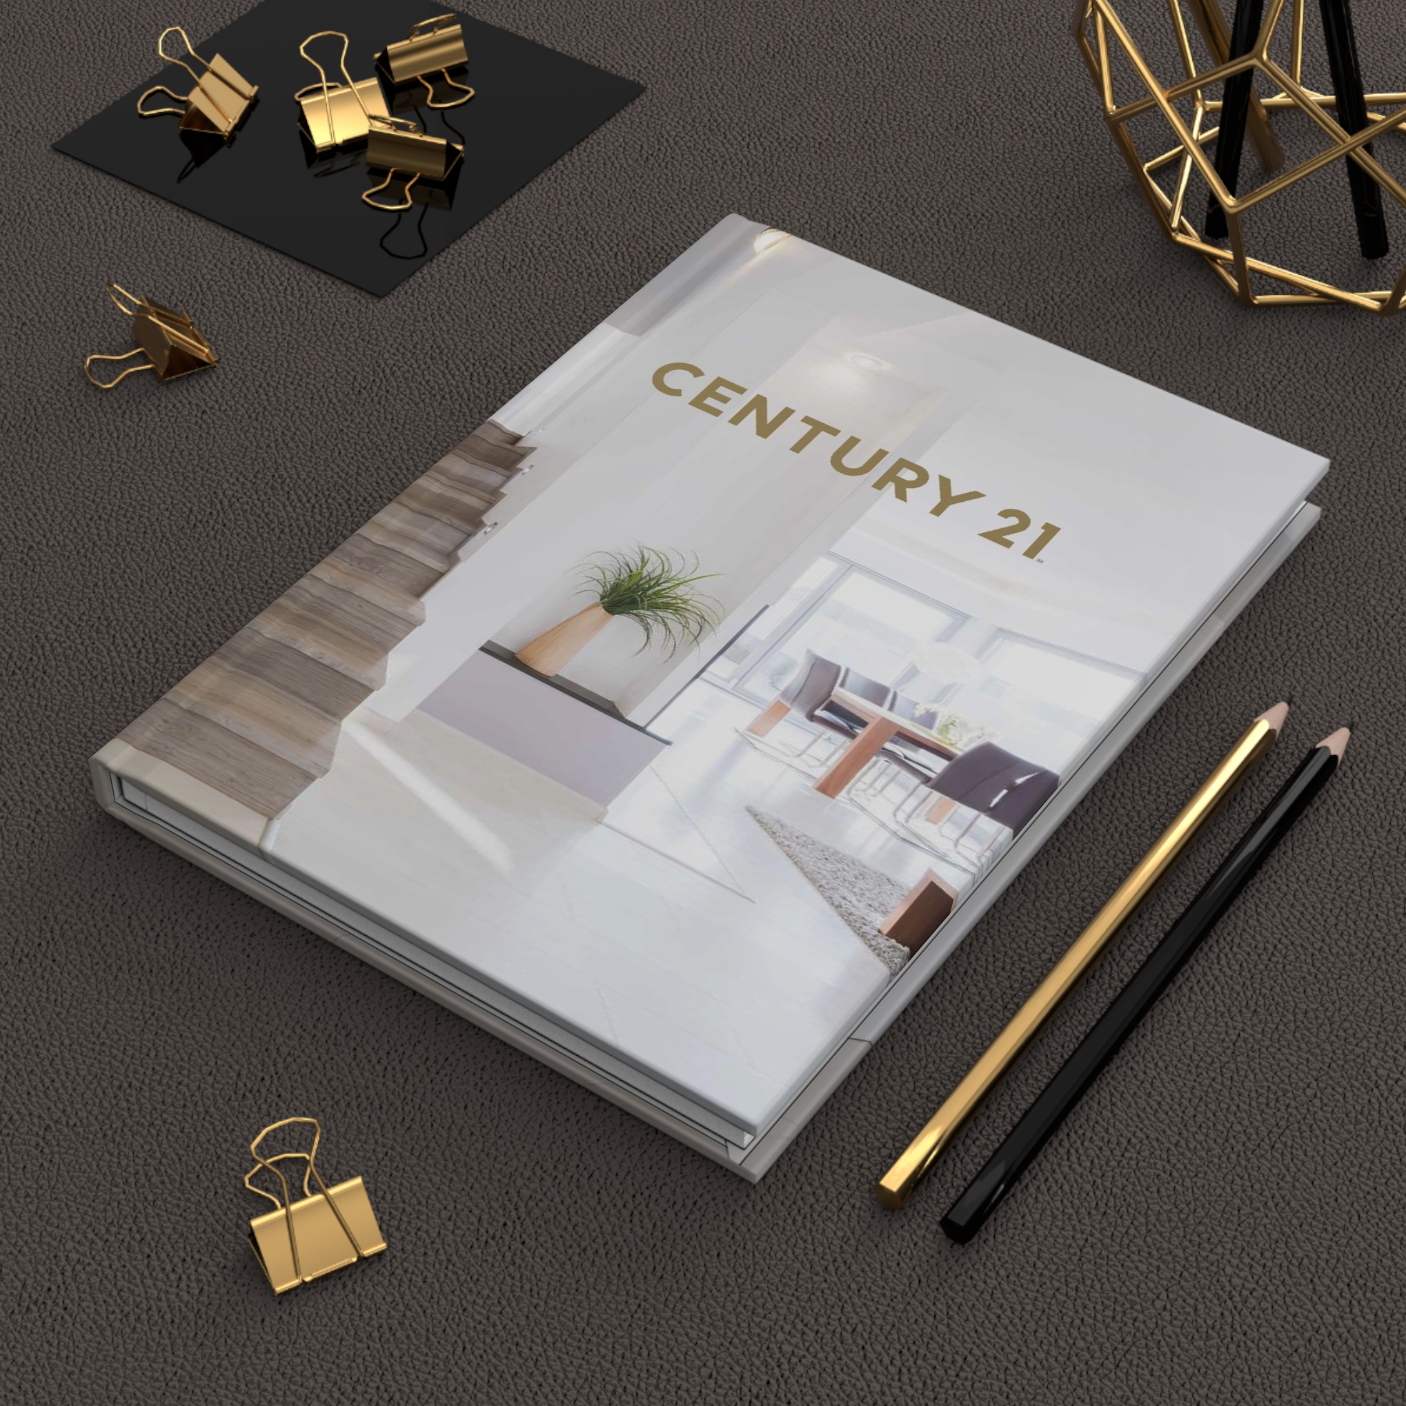 Century 21 Full Color Hardcover Binders Luxury Living (from as low as $10.46 per cover)